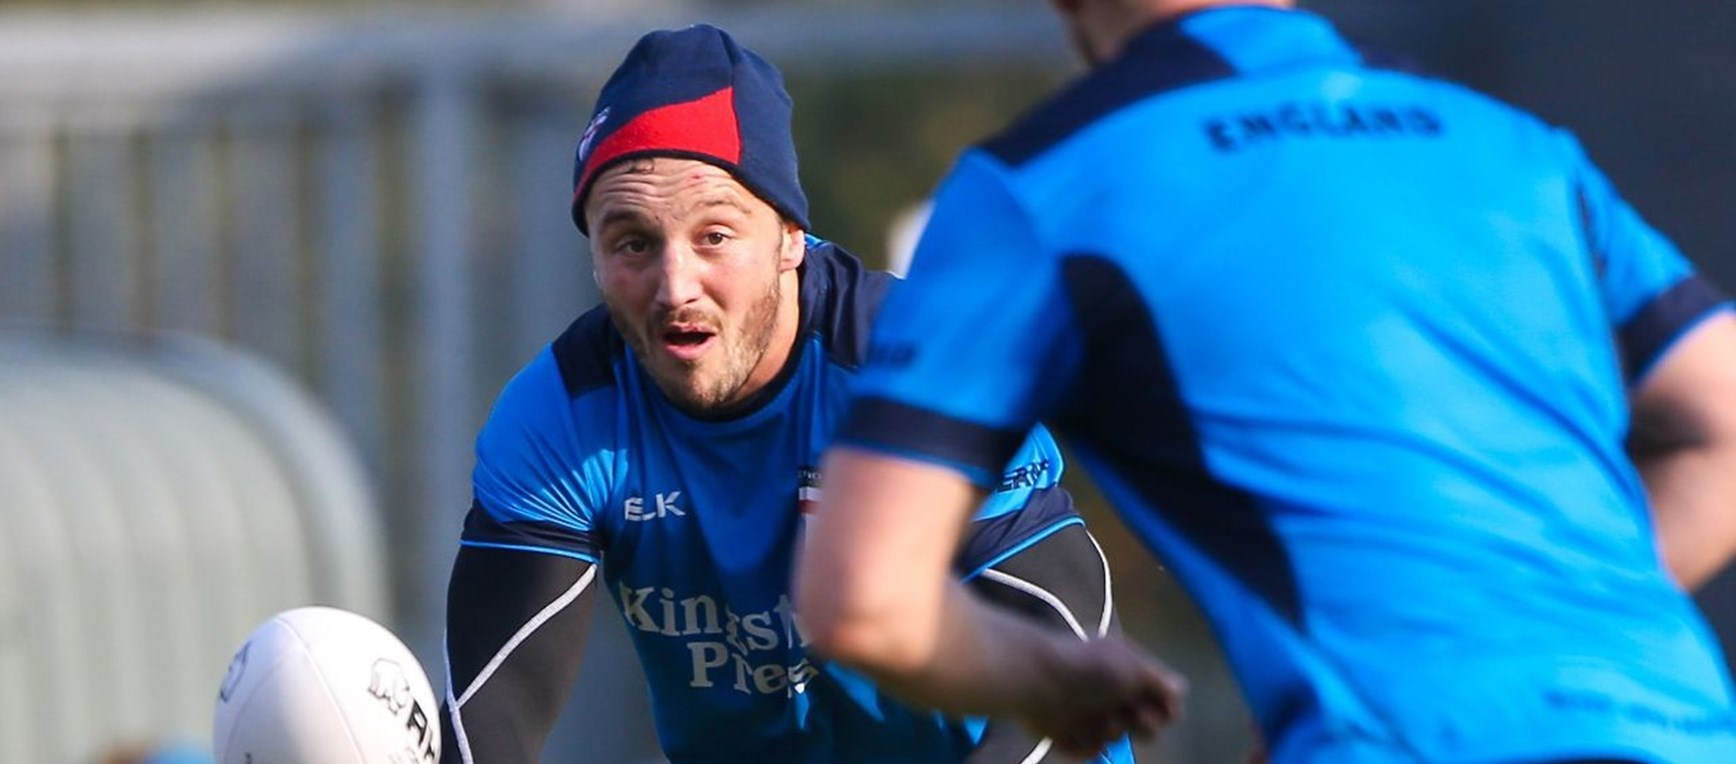 Gallery: England and NZ Four Nations training